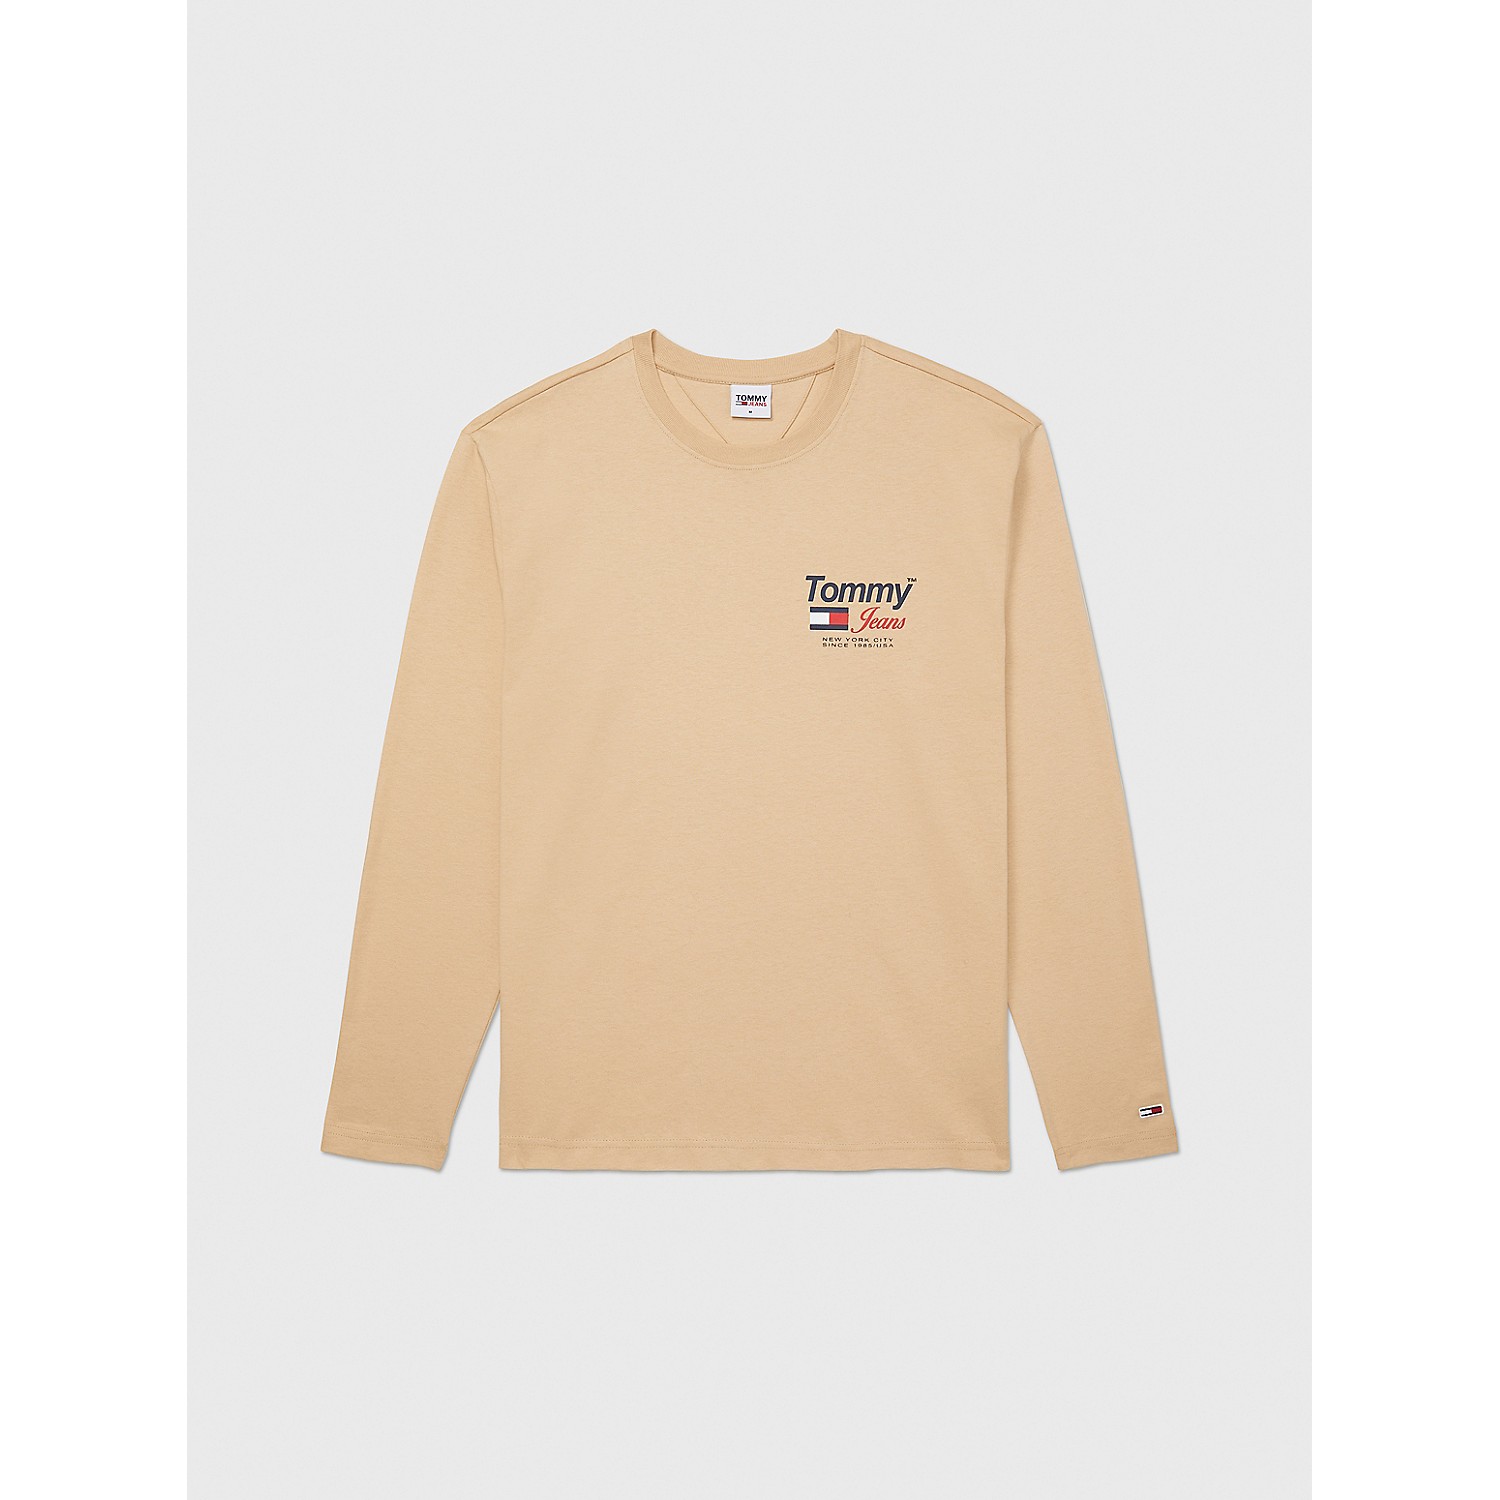 TOMMY JEANS Long-Sleeve Logo T-Shirt